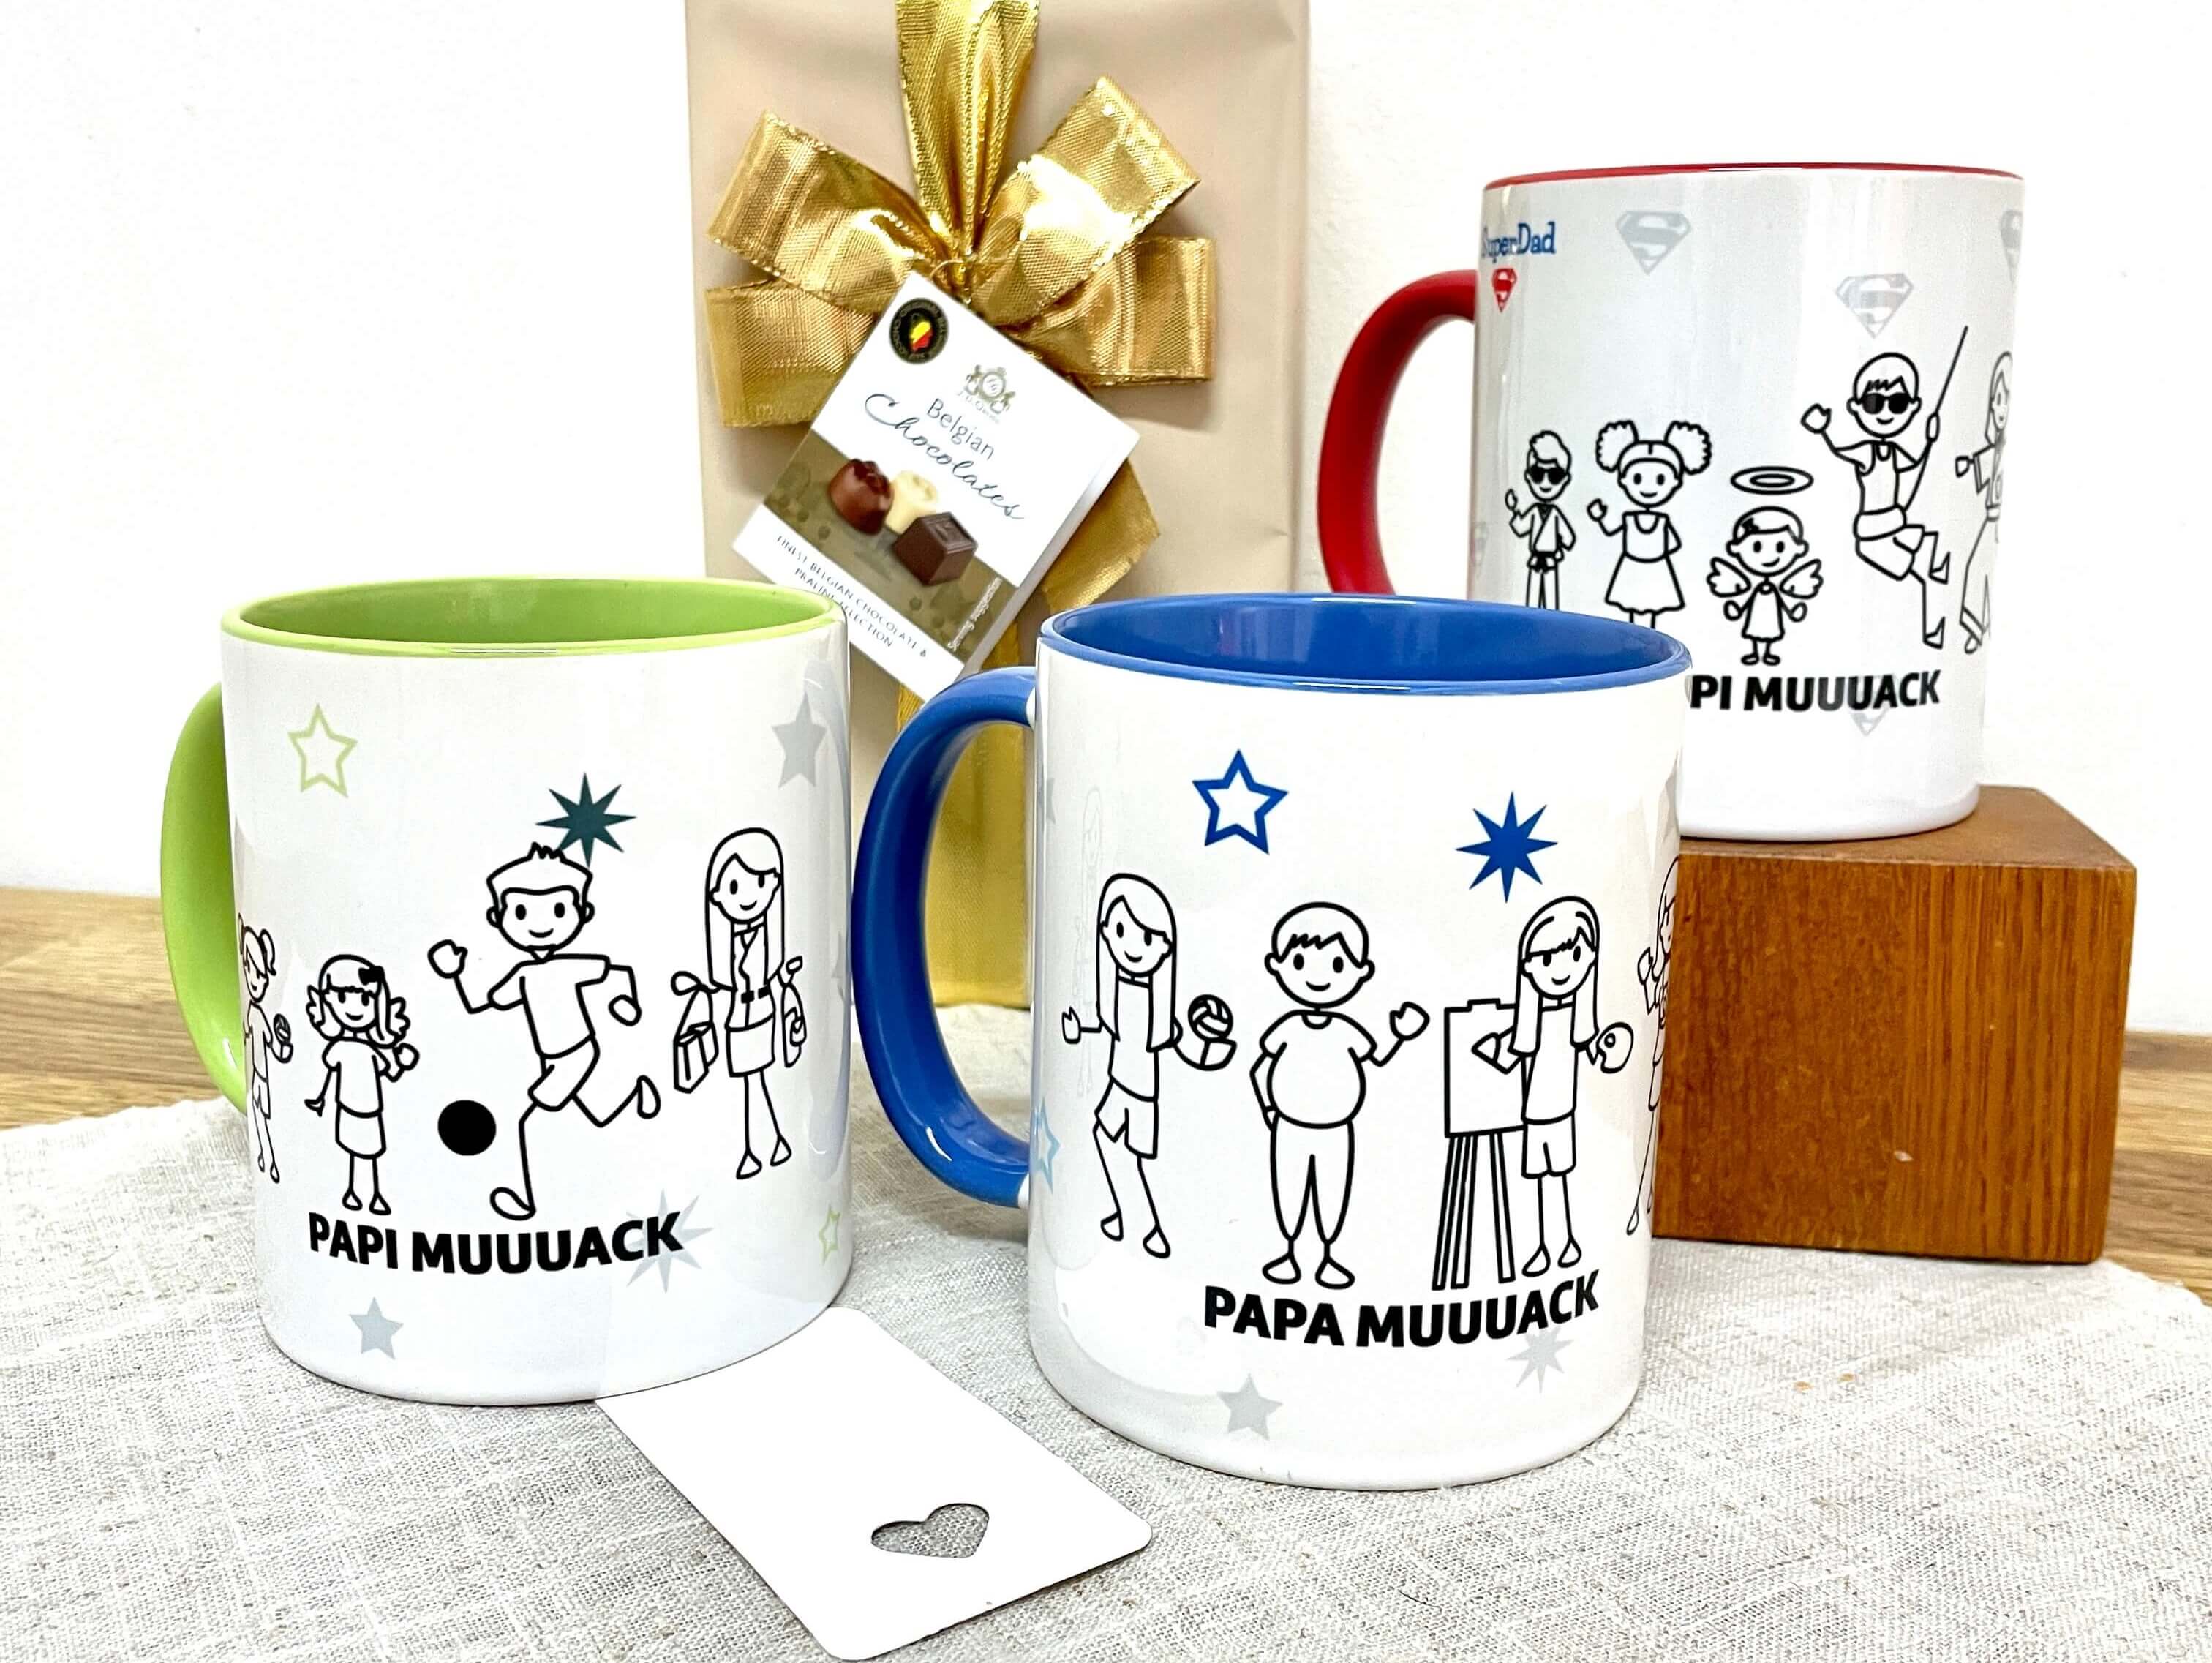 Personalised mugs as gift ideas for father